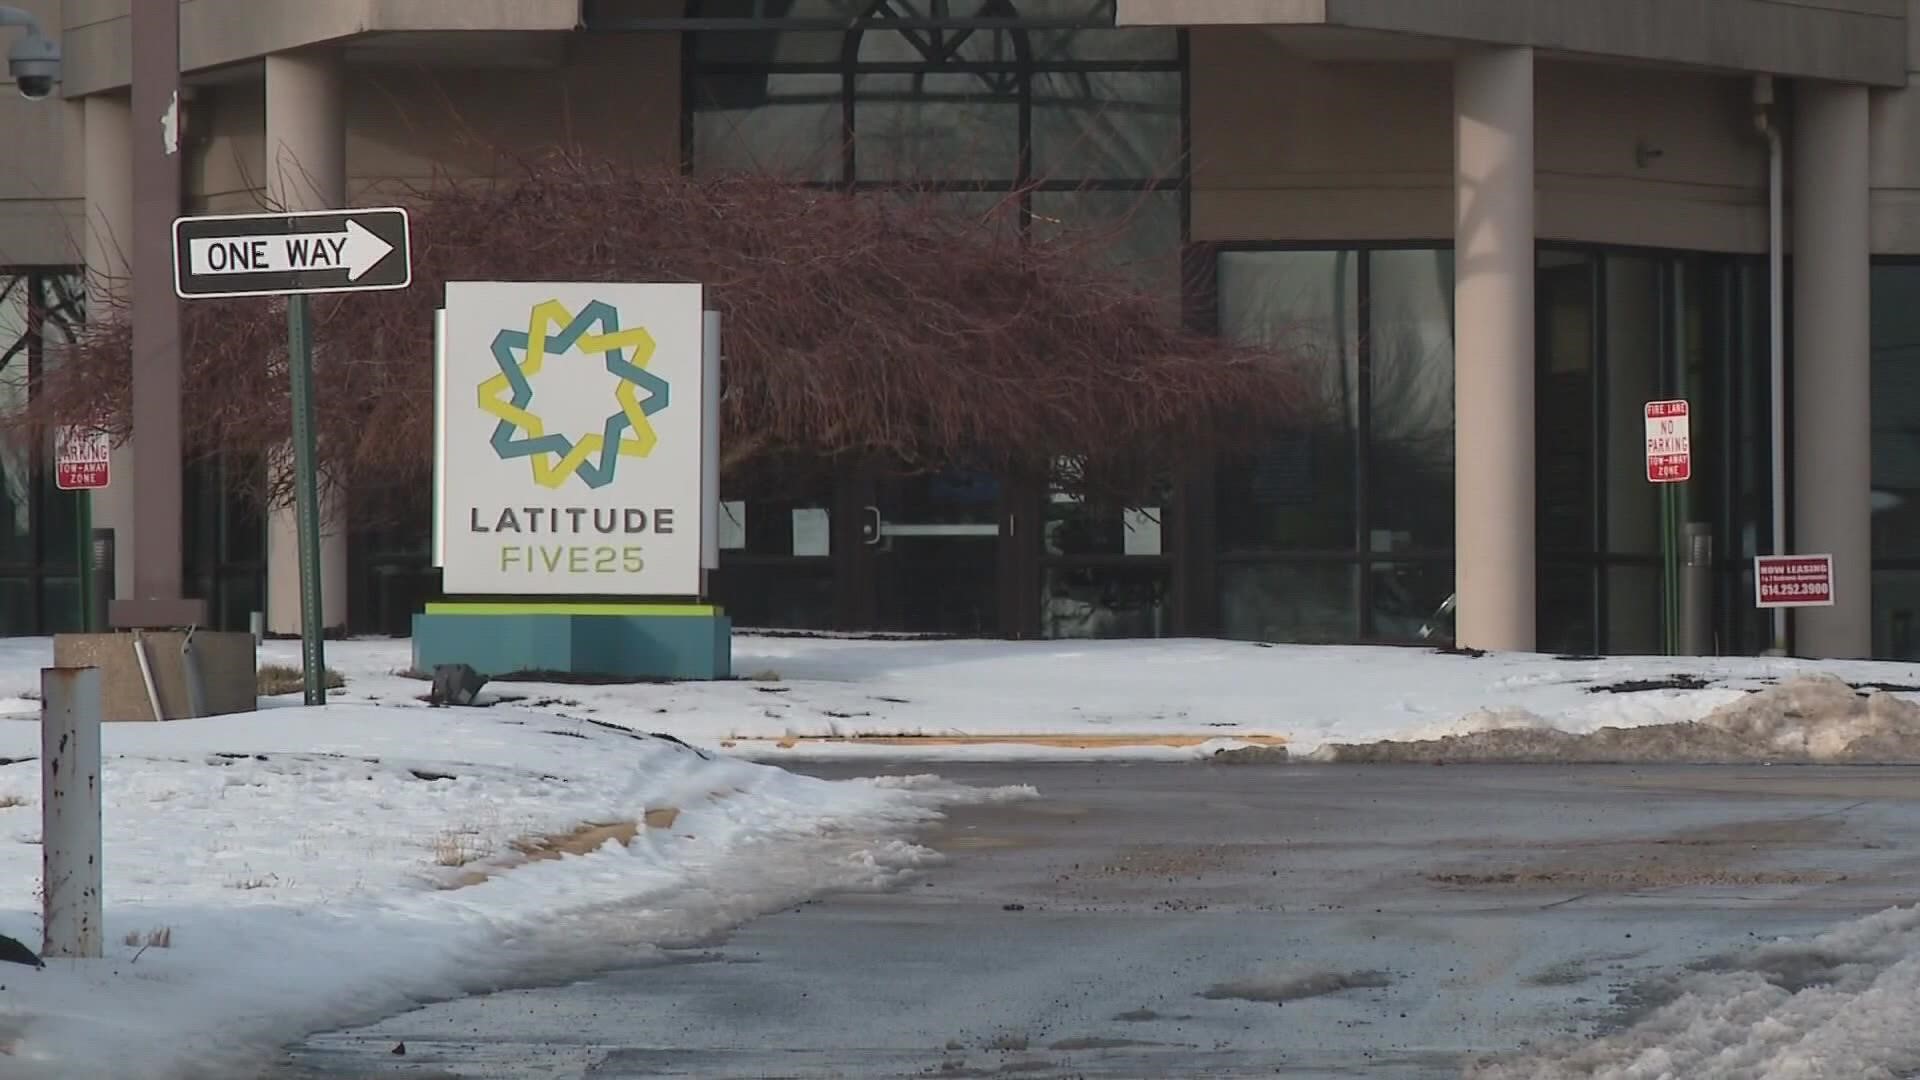 Residents of Latitude Five25 will wake up for the next week at an emergency shelter while city leaders figure out the next steps for those displaced from their home.